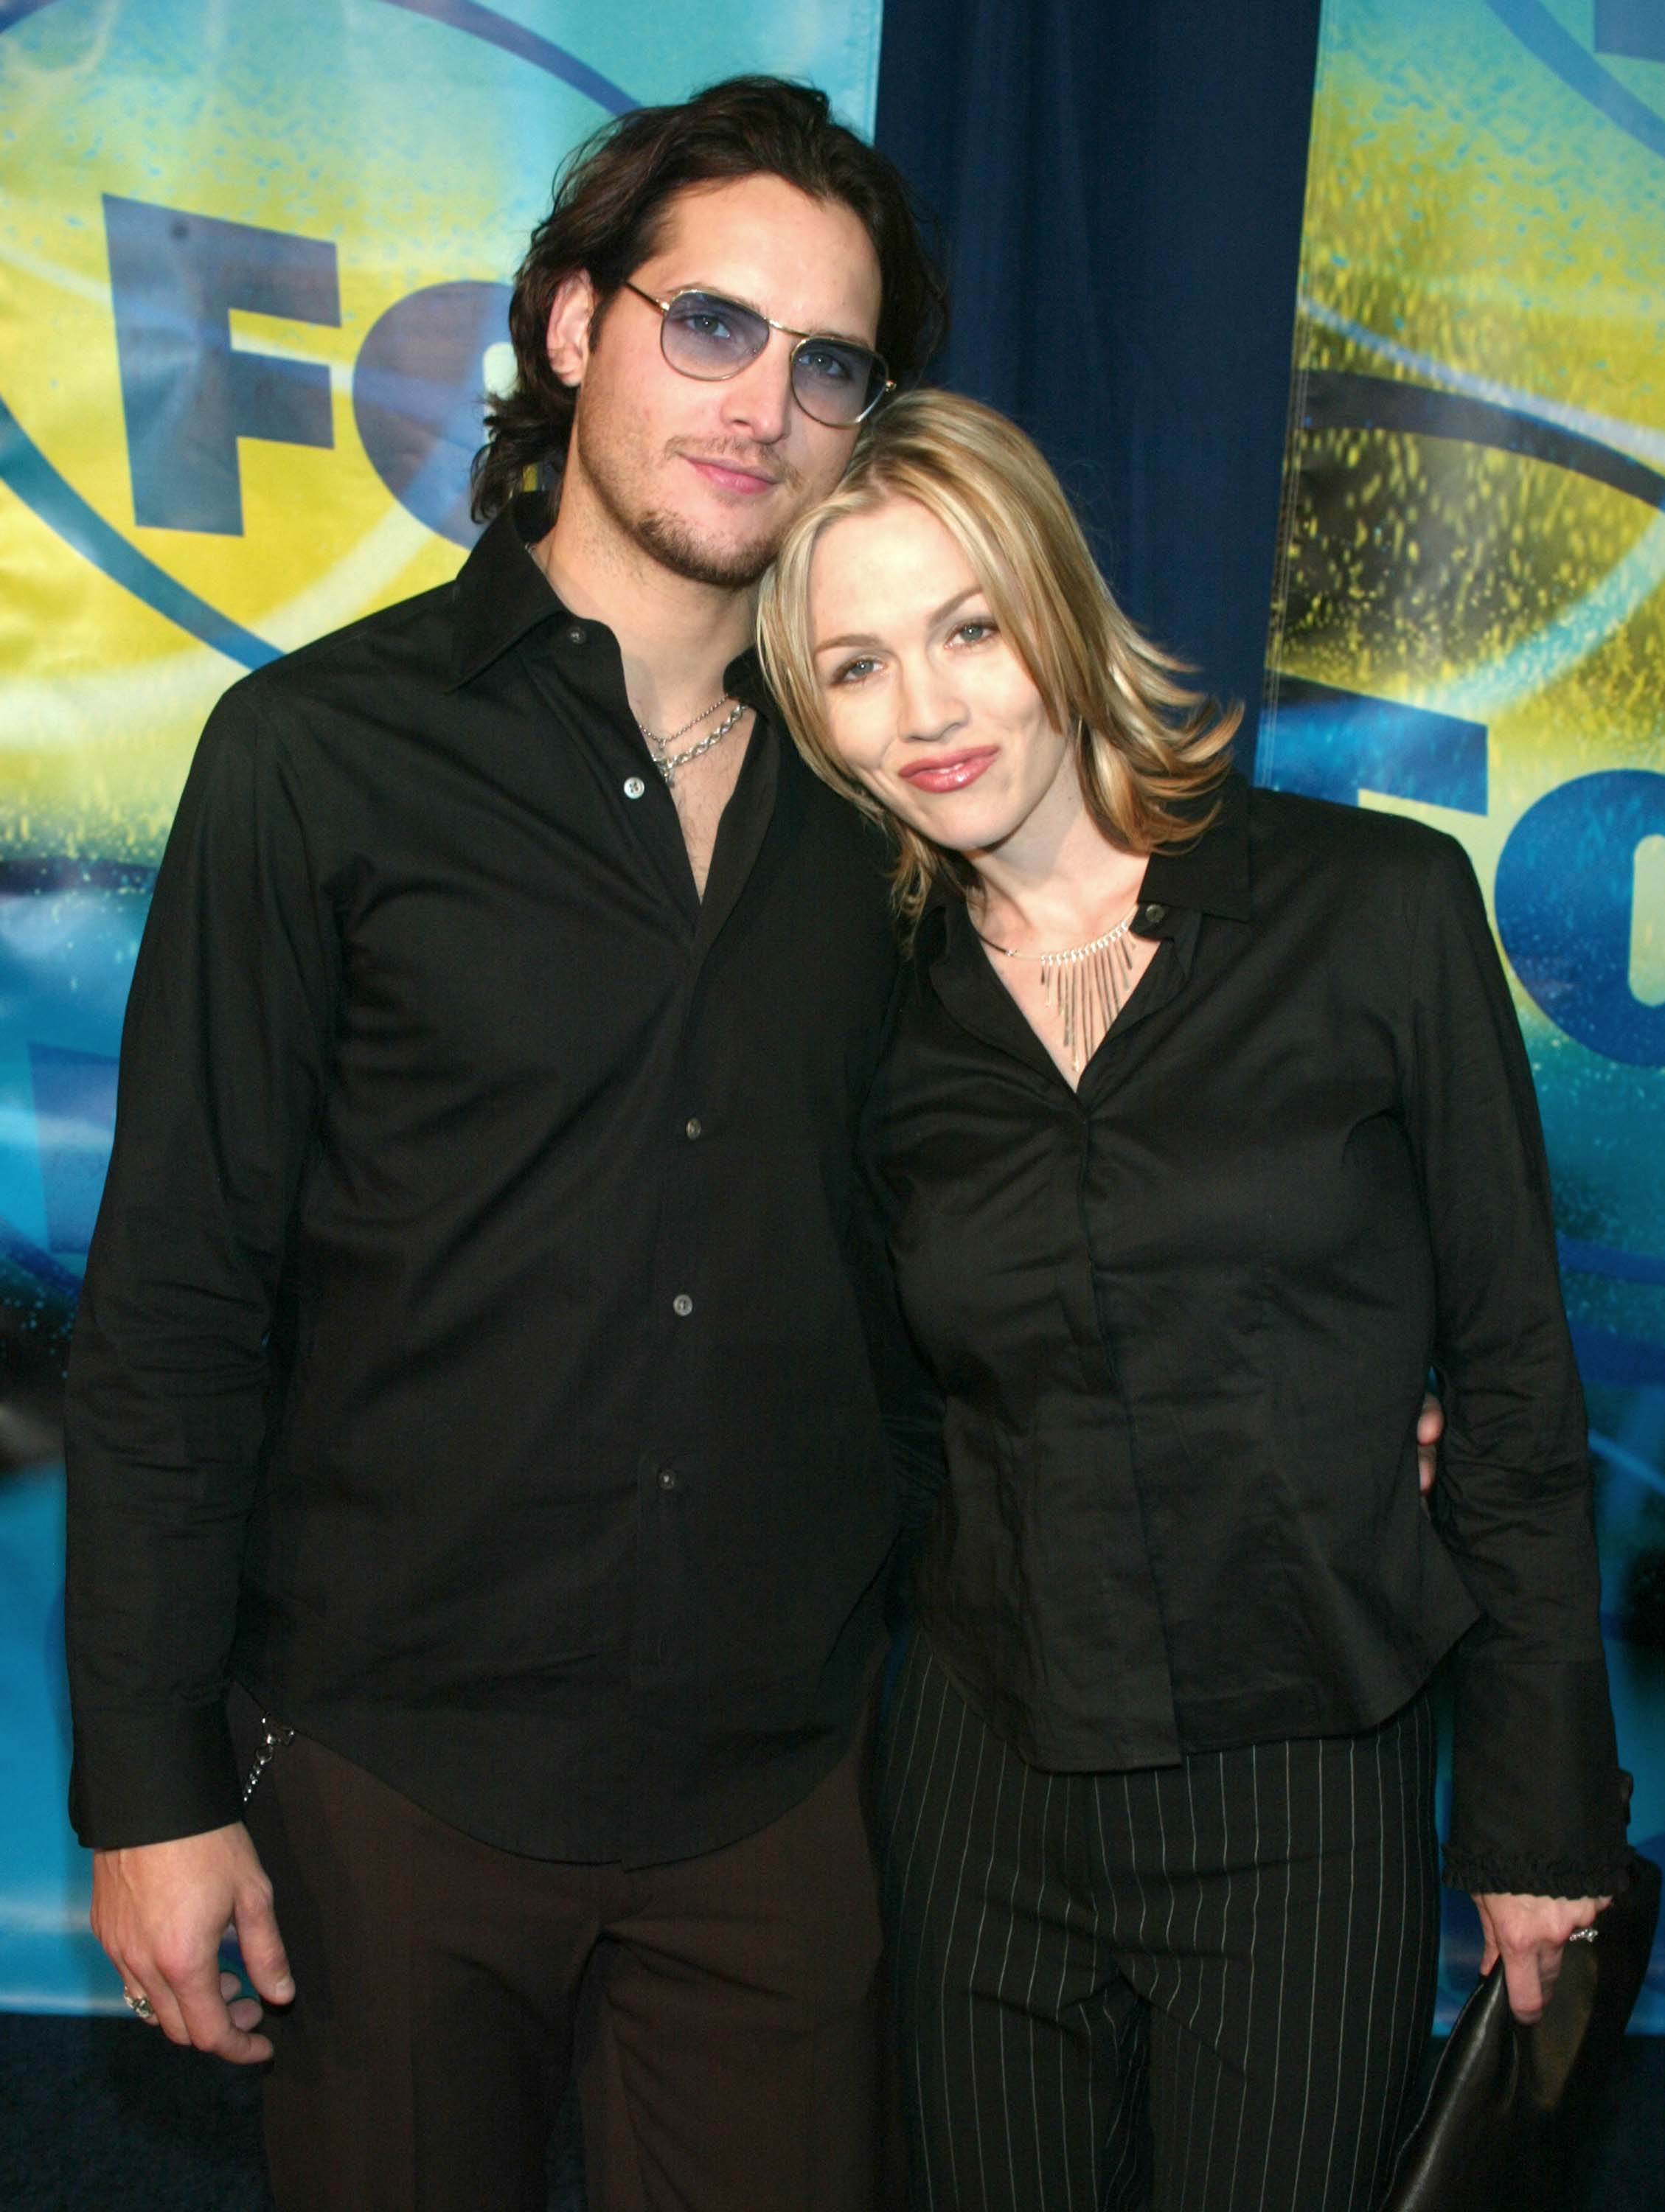 Peter Facinelli and Jennie Garth at Fox Television's 2002-2003 Upfront Party at Pier 88 in New York City, New York. | Source: Getty Images